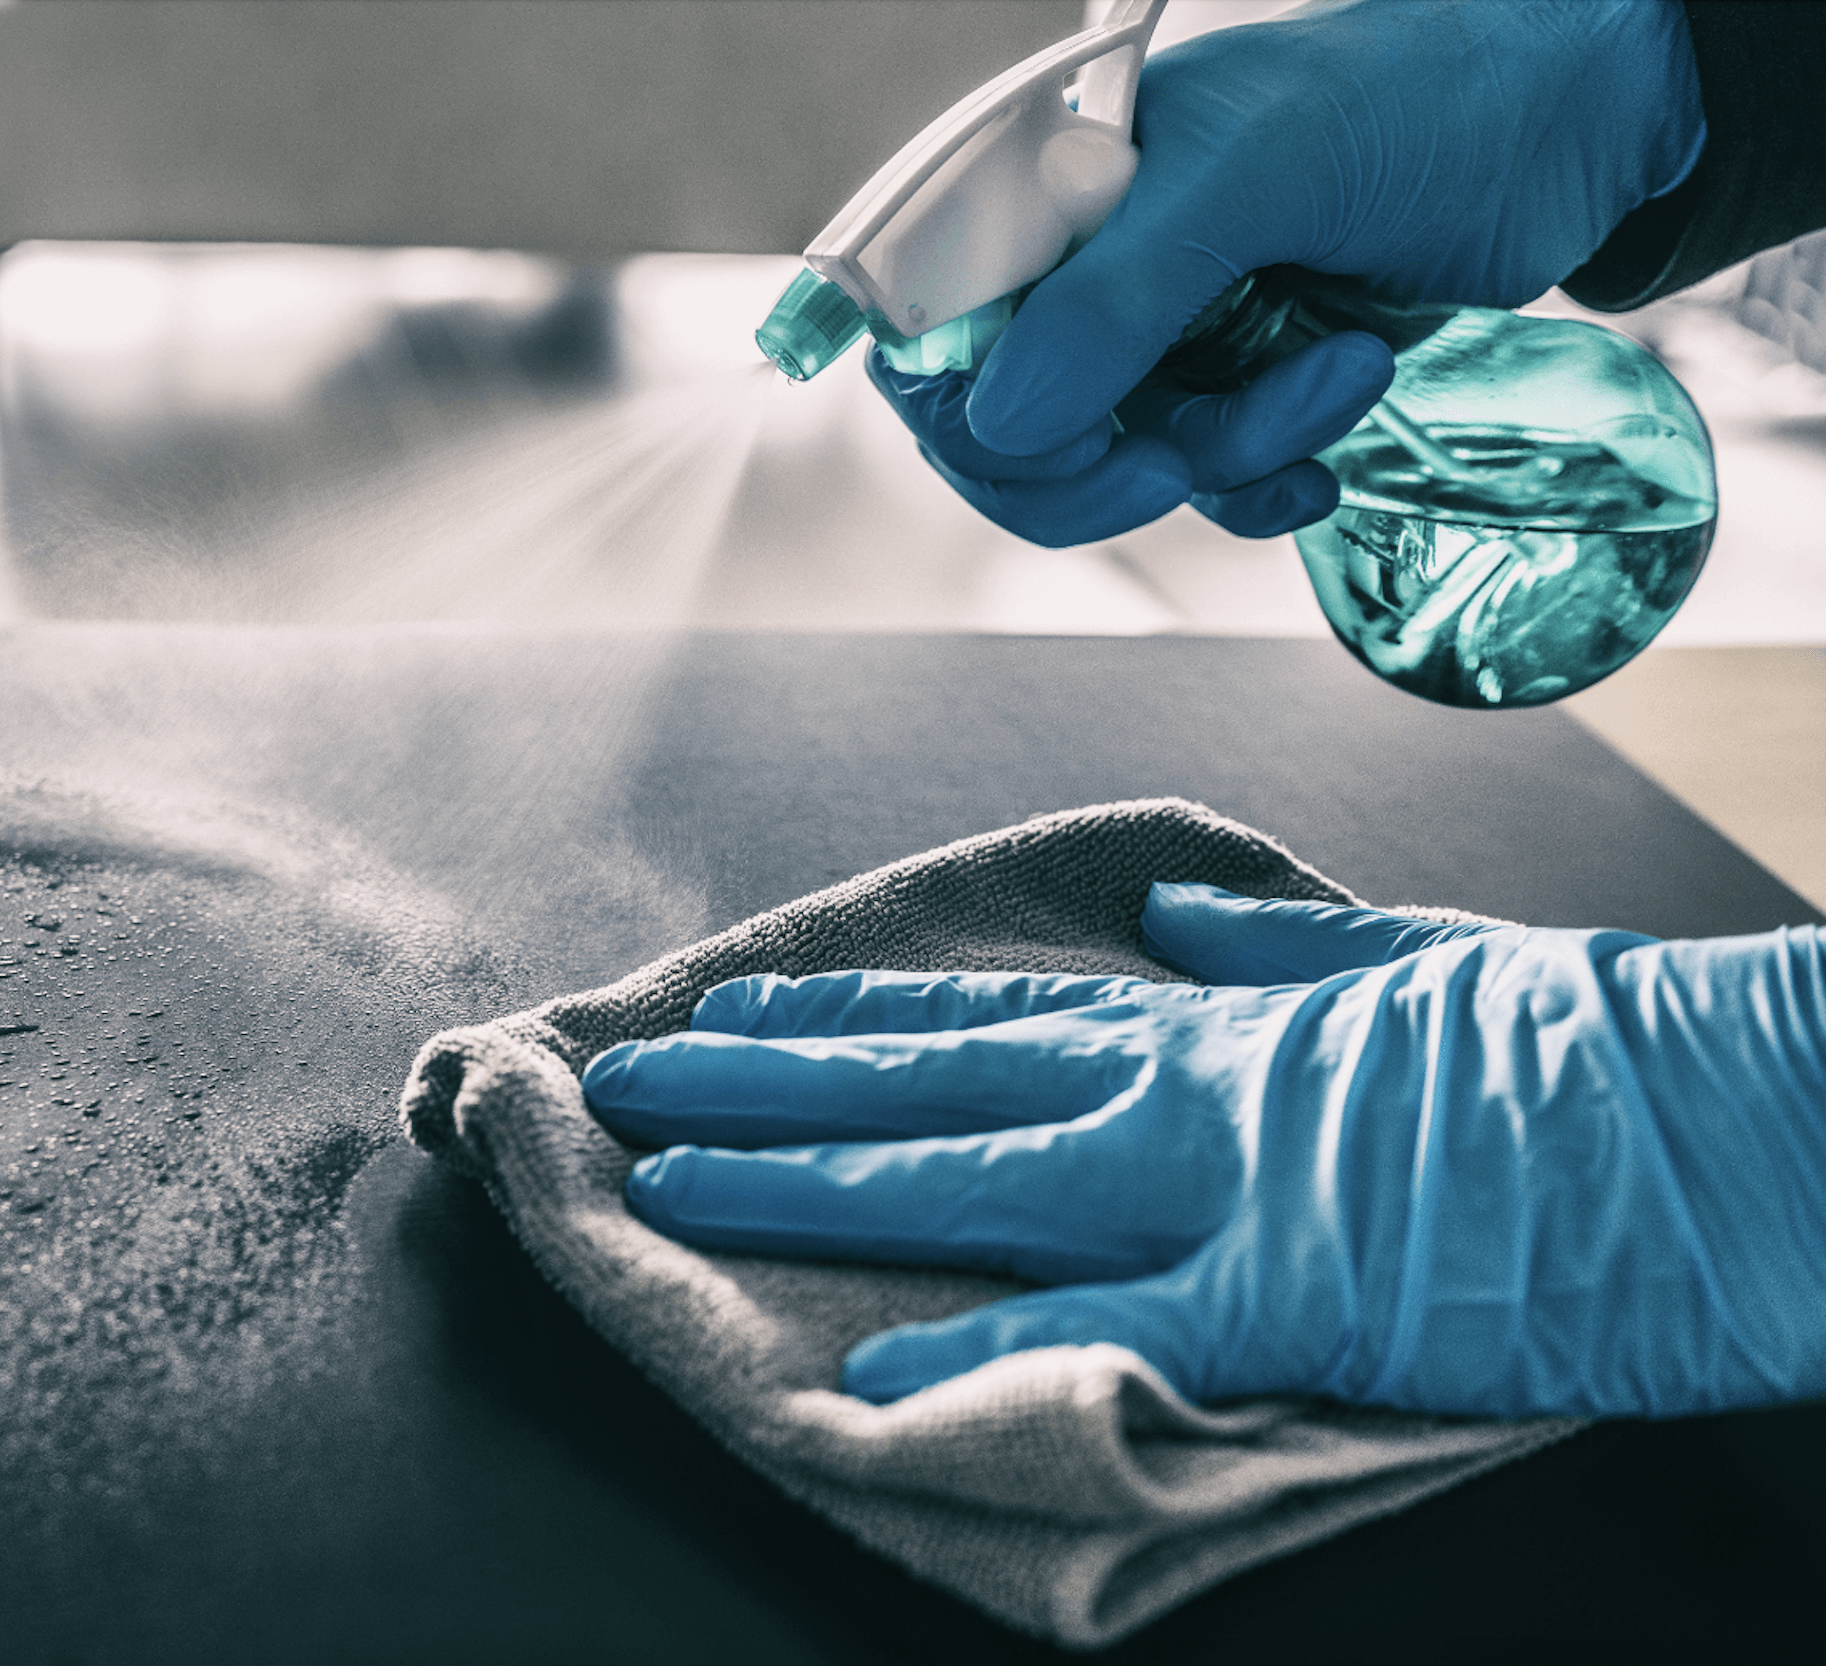 gloved hands sanitizing an office table with disinfectant spray and clean rag